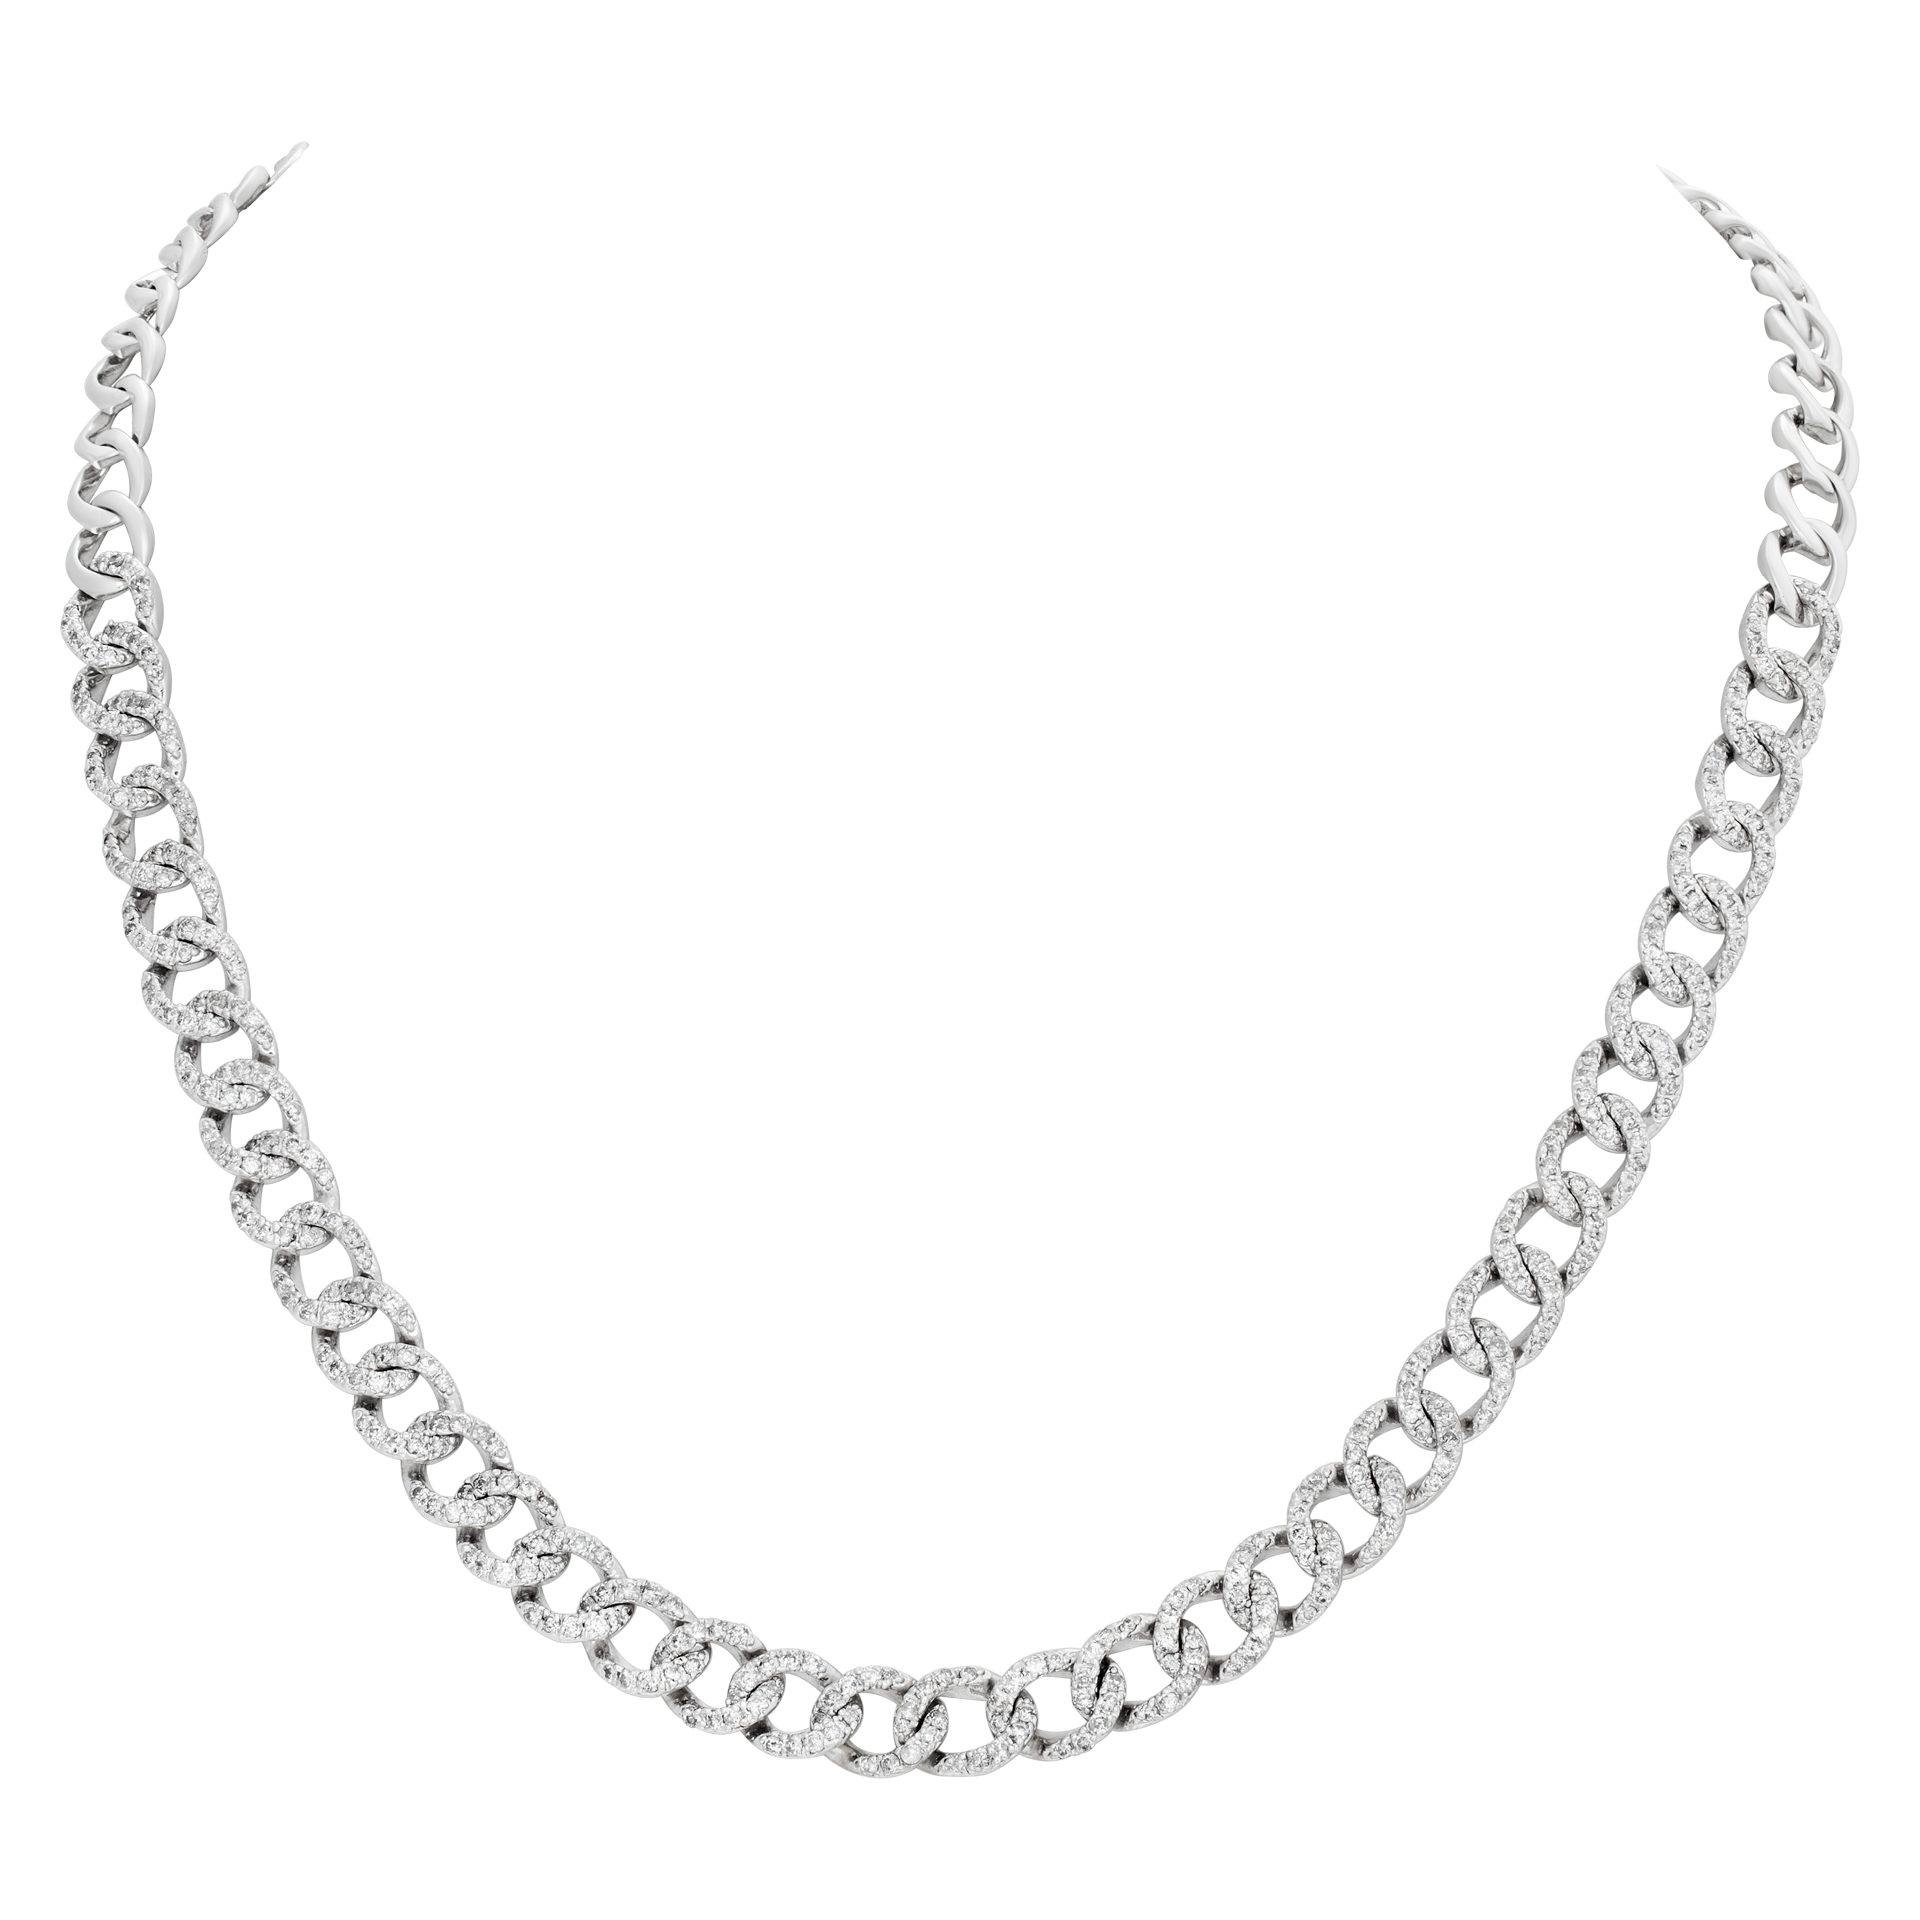 Curb Link Pave Diamond Necklace In 18k White Gold, 17" Complete Pave Diamonds Totaling 2 Carats image 1